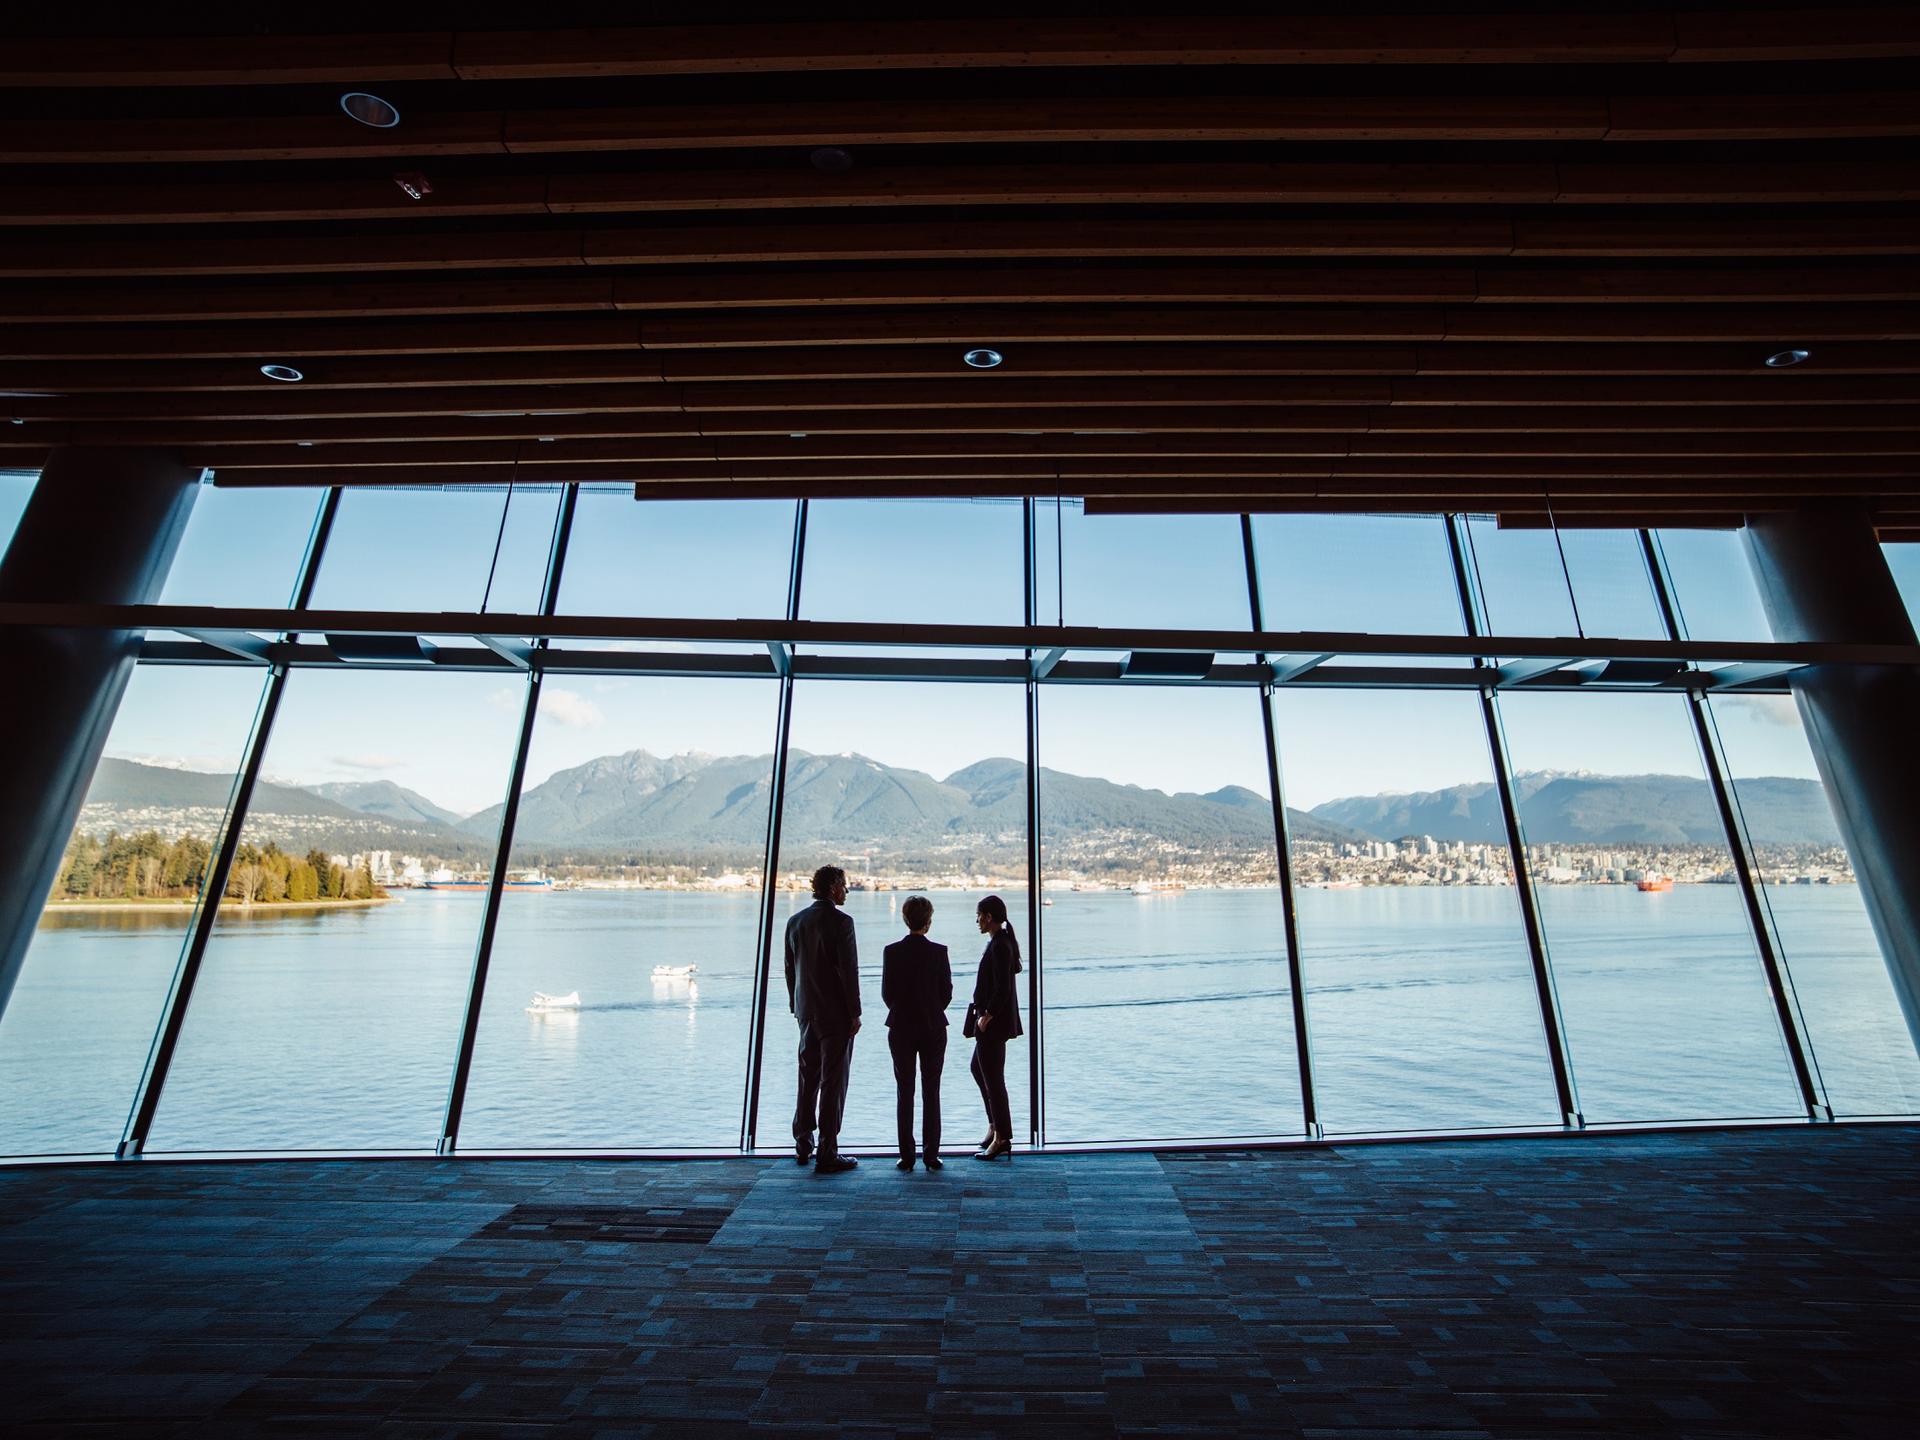 Three people looking out at a glass with views of Vancouver's mountains